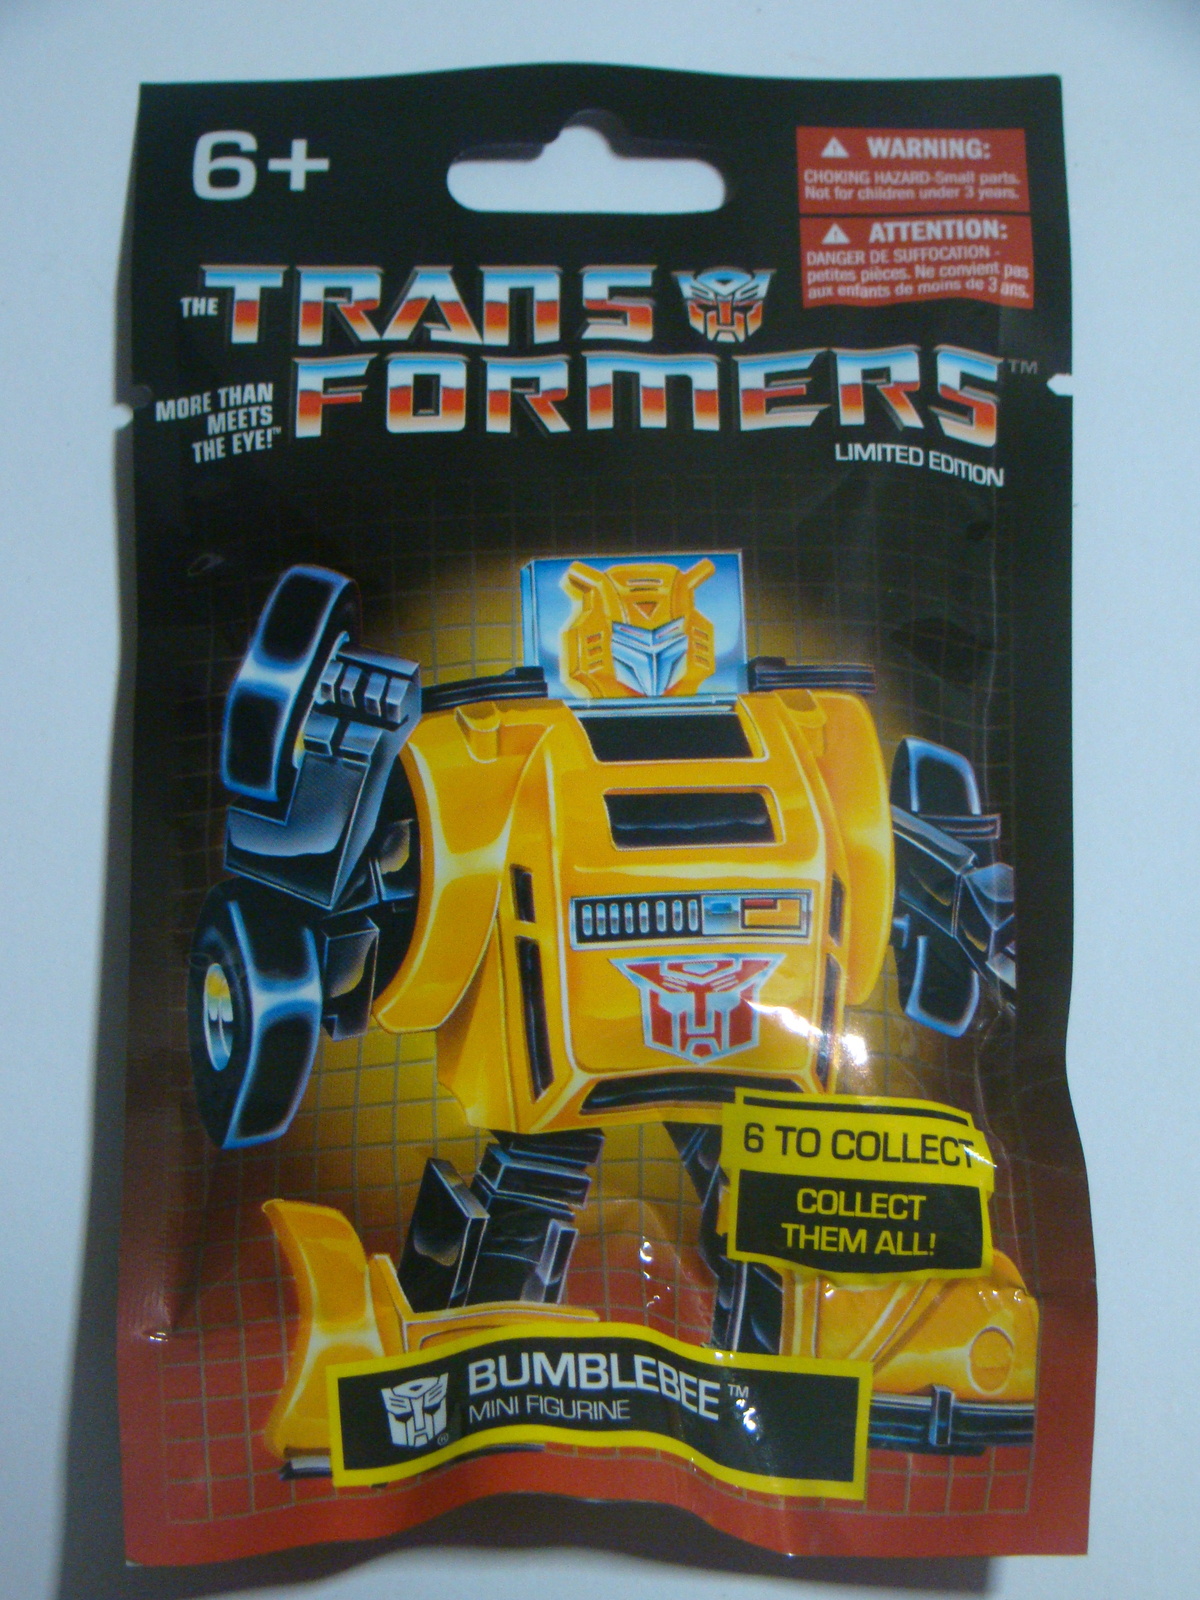 TRANS FORMERS - LIMITED EDITION - BUMBLEBEE - MINI FIGURINE - $10.00